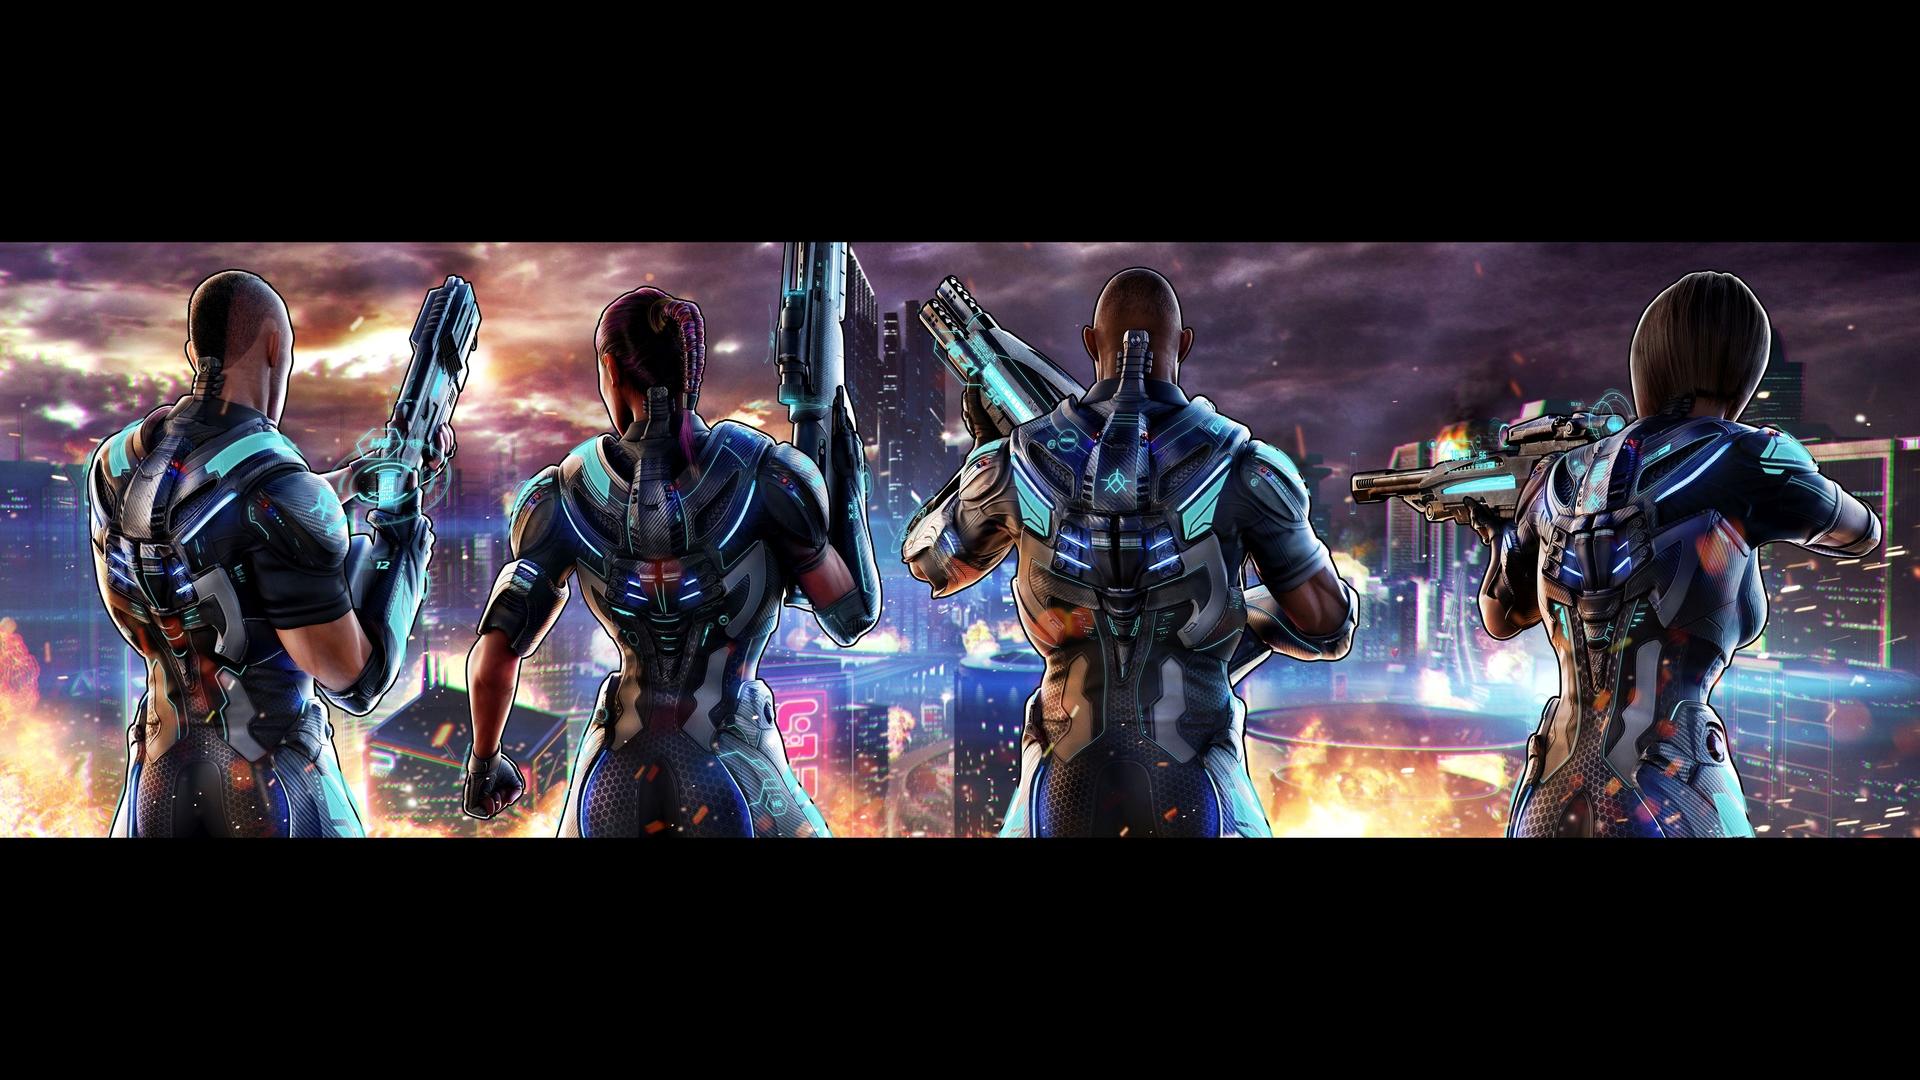 Crackdown 3 [Video Game]